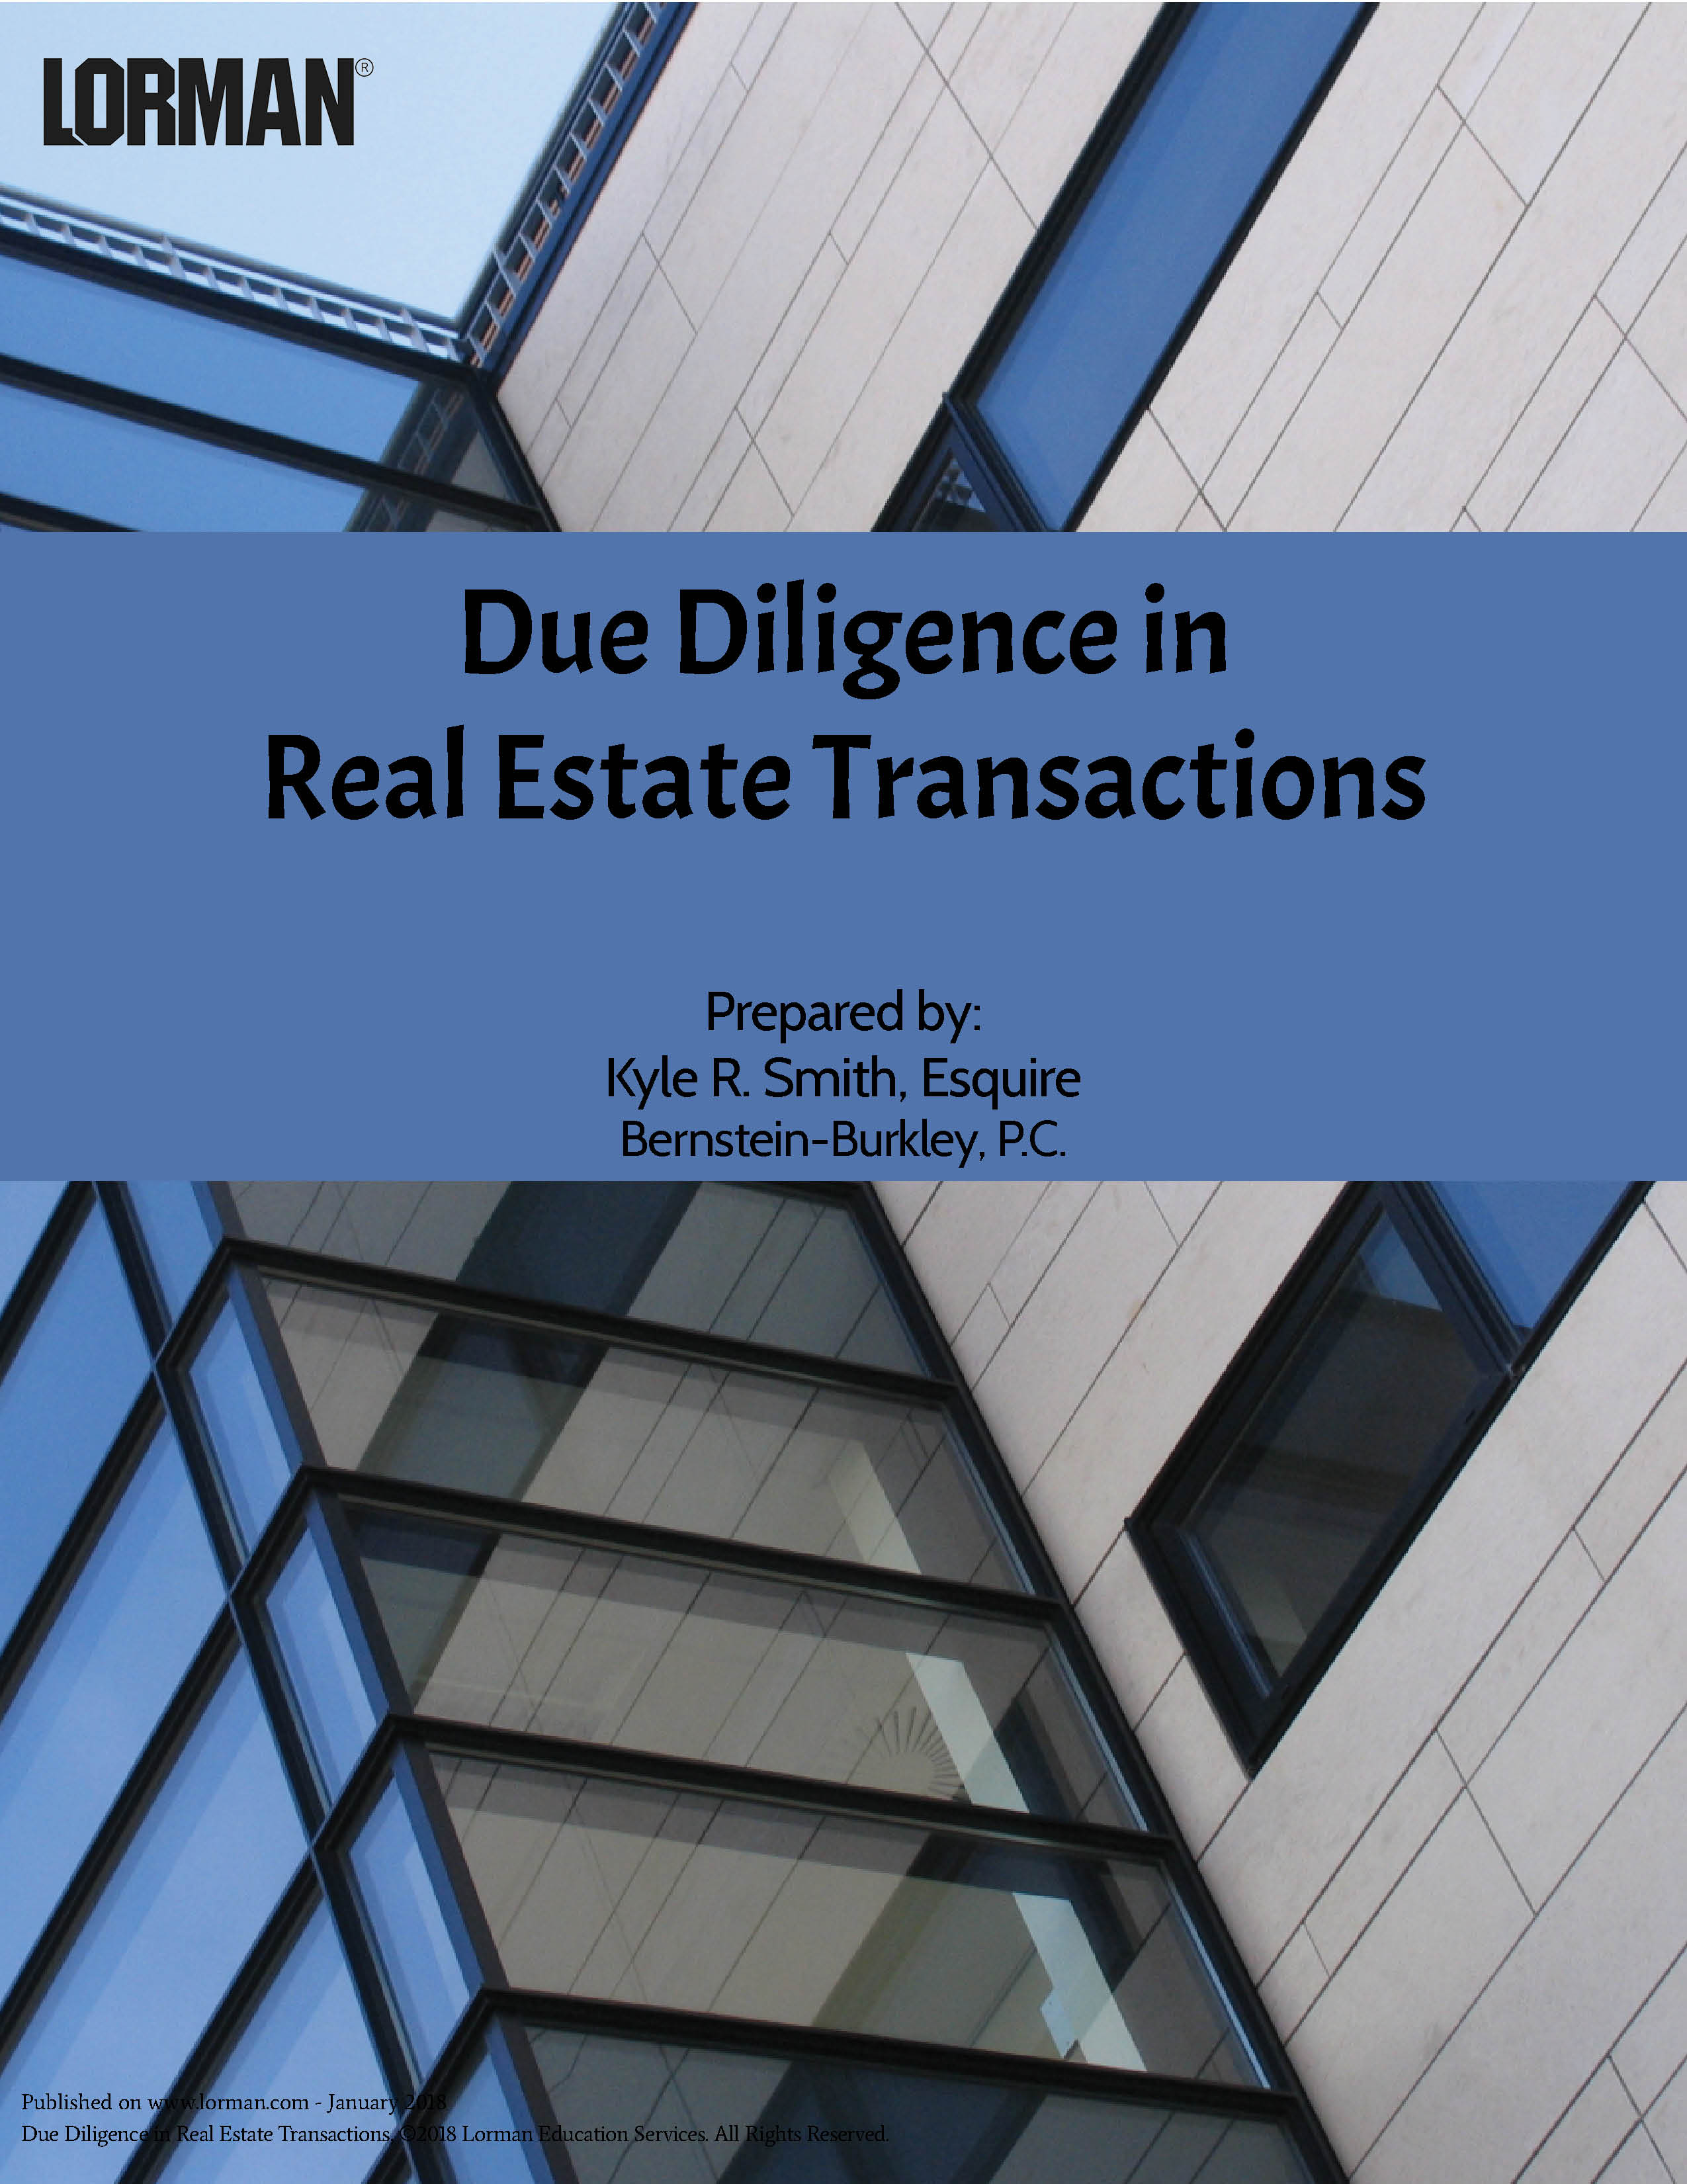 Due Diligence in Real Estate Transactions